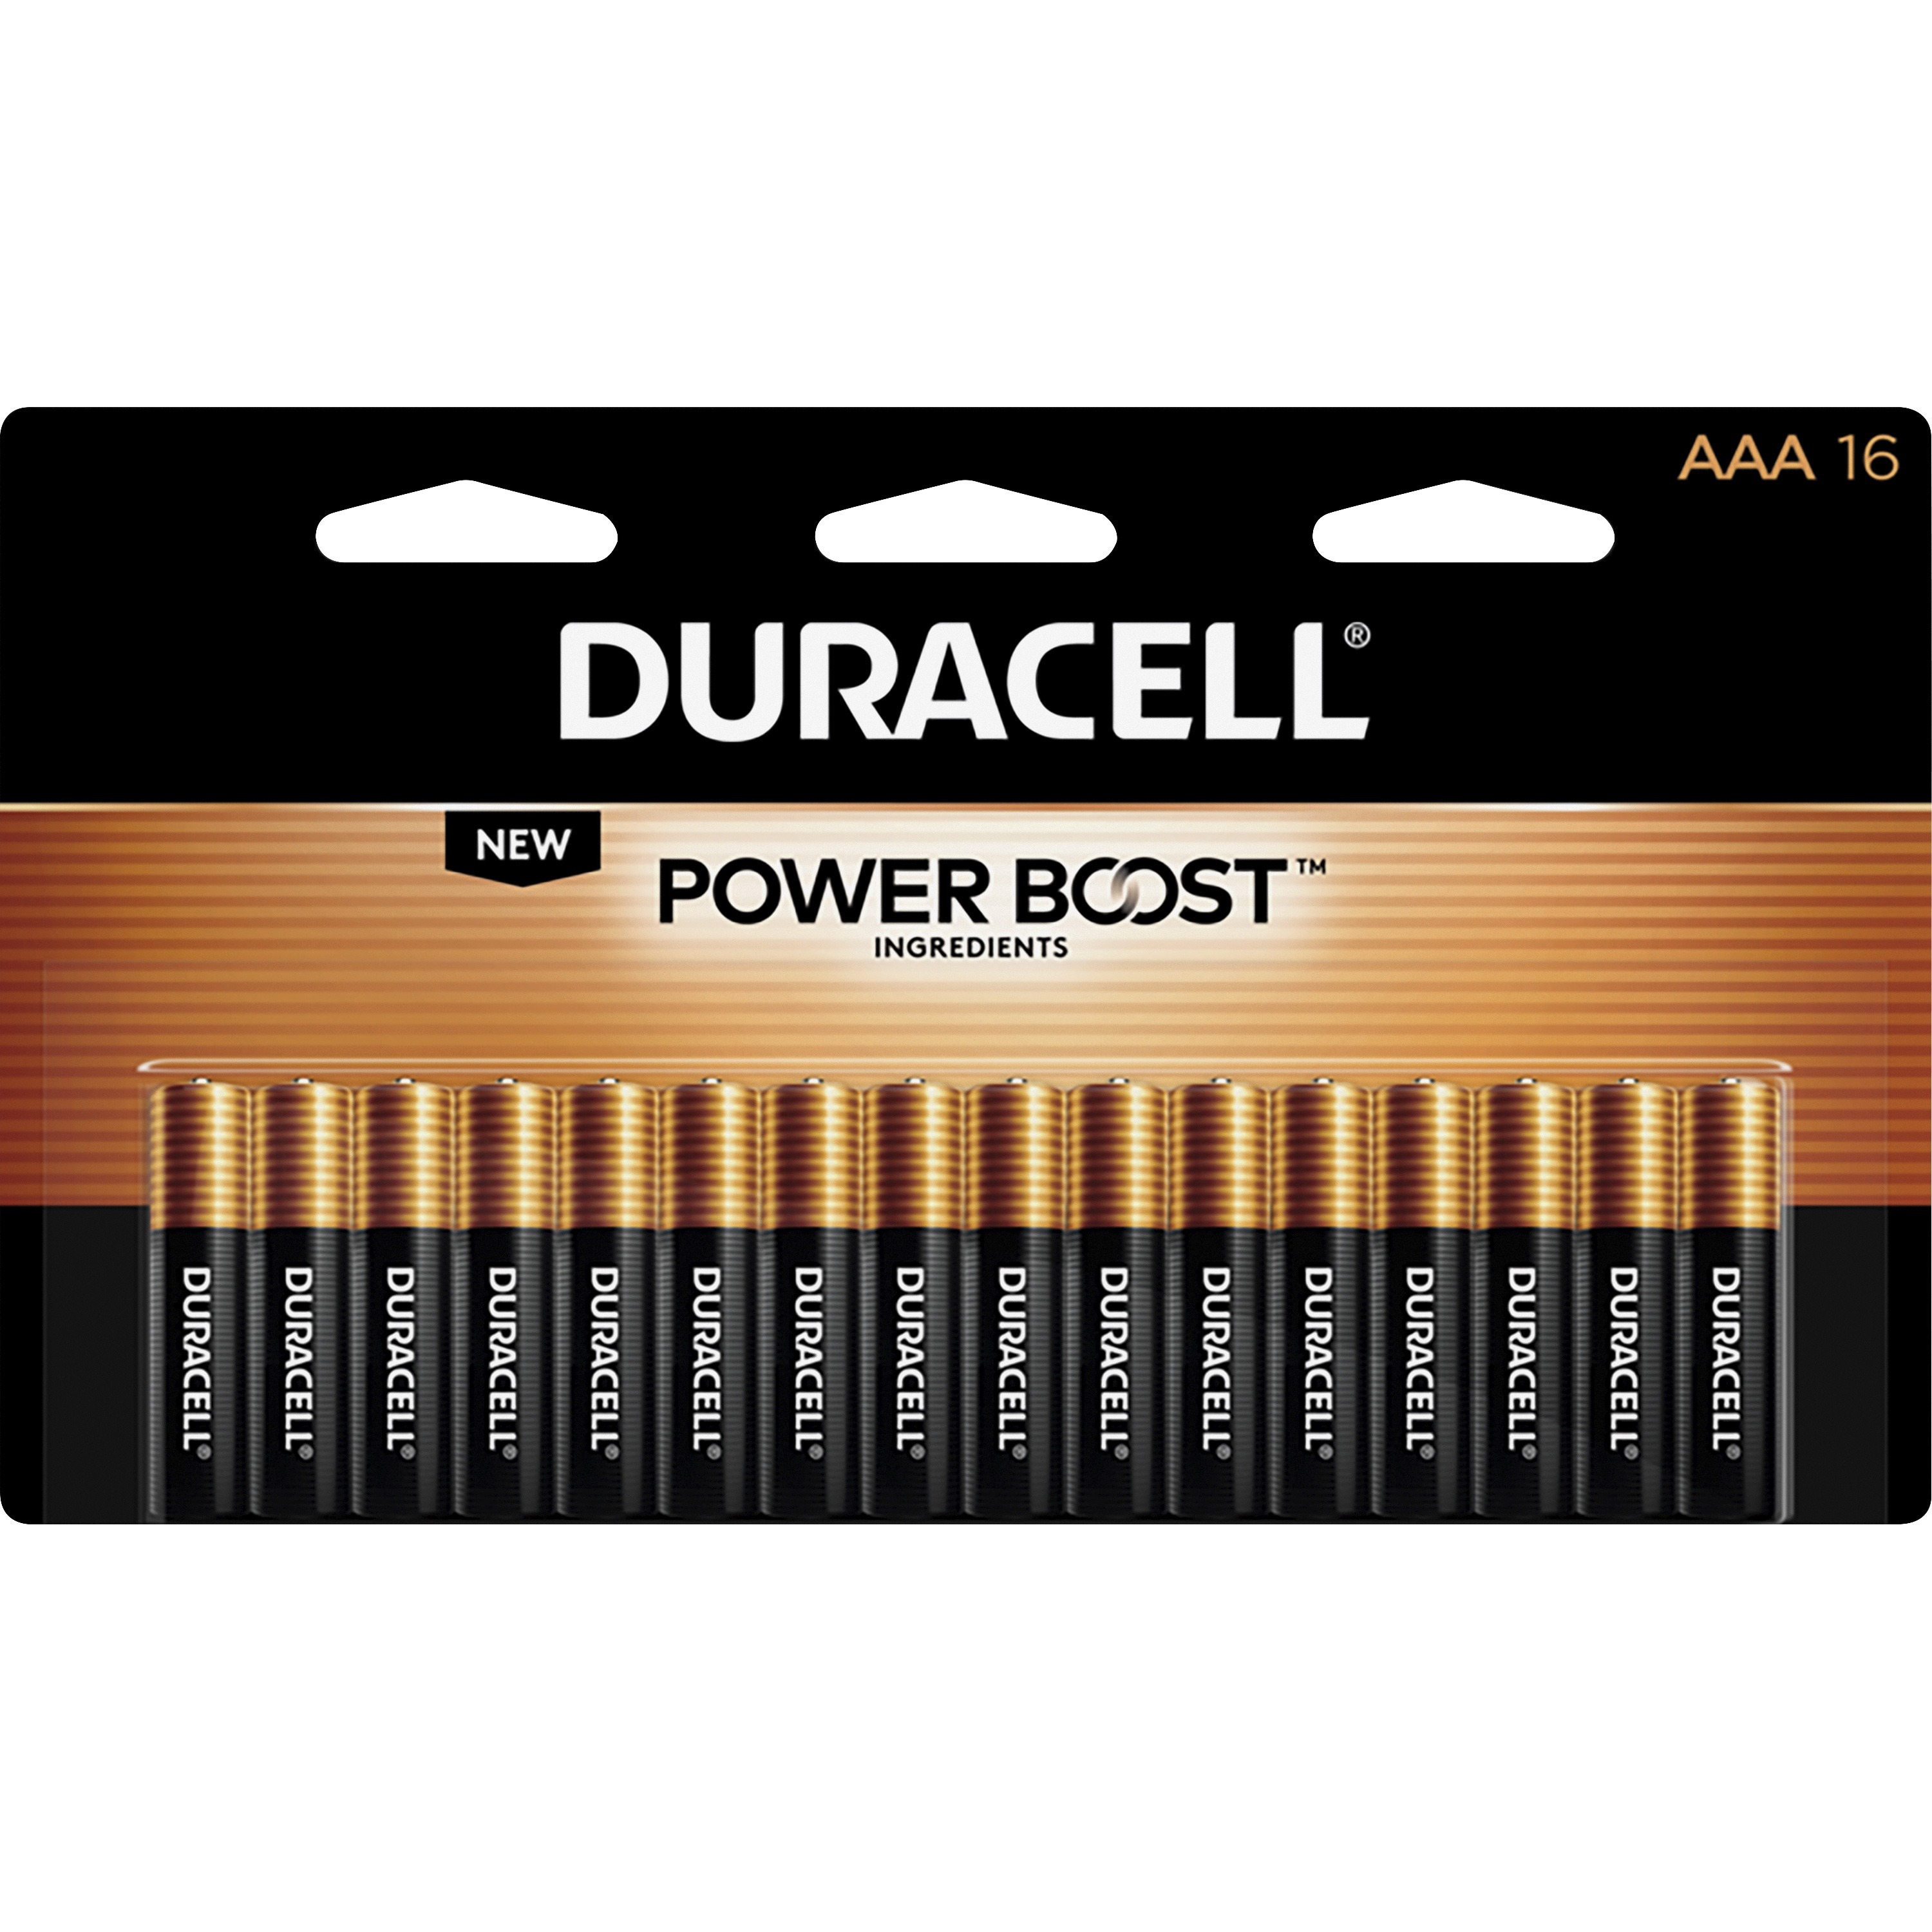 DURACELL CopperTop MN2400 1.5V AAA Alkaline Battery, 10-pack 